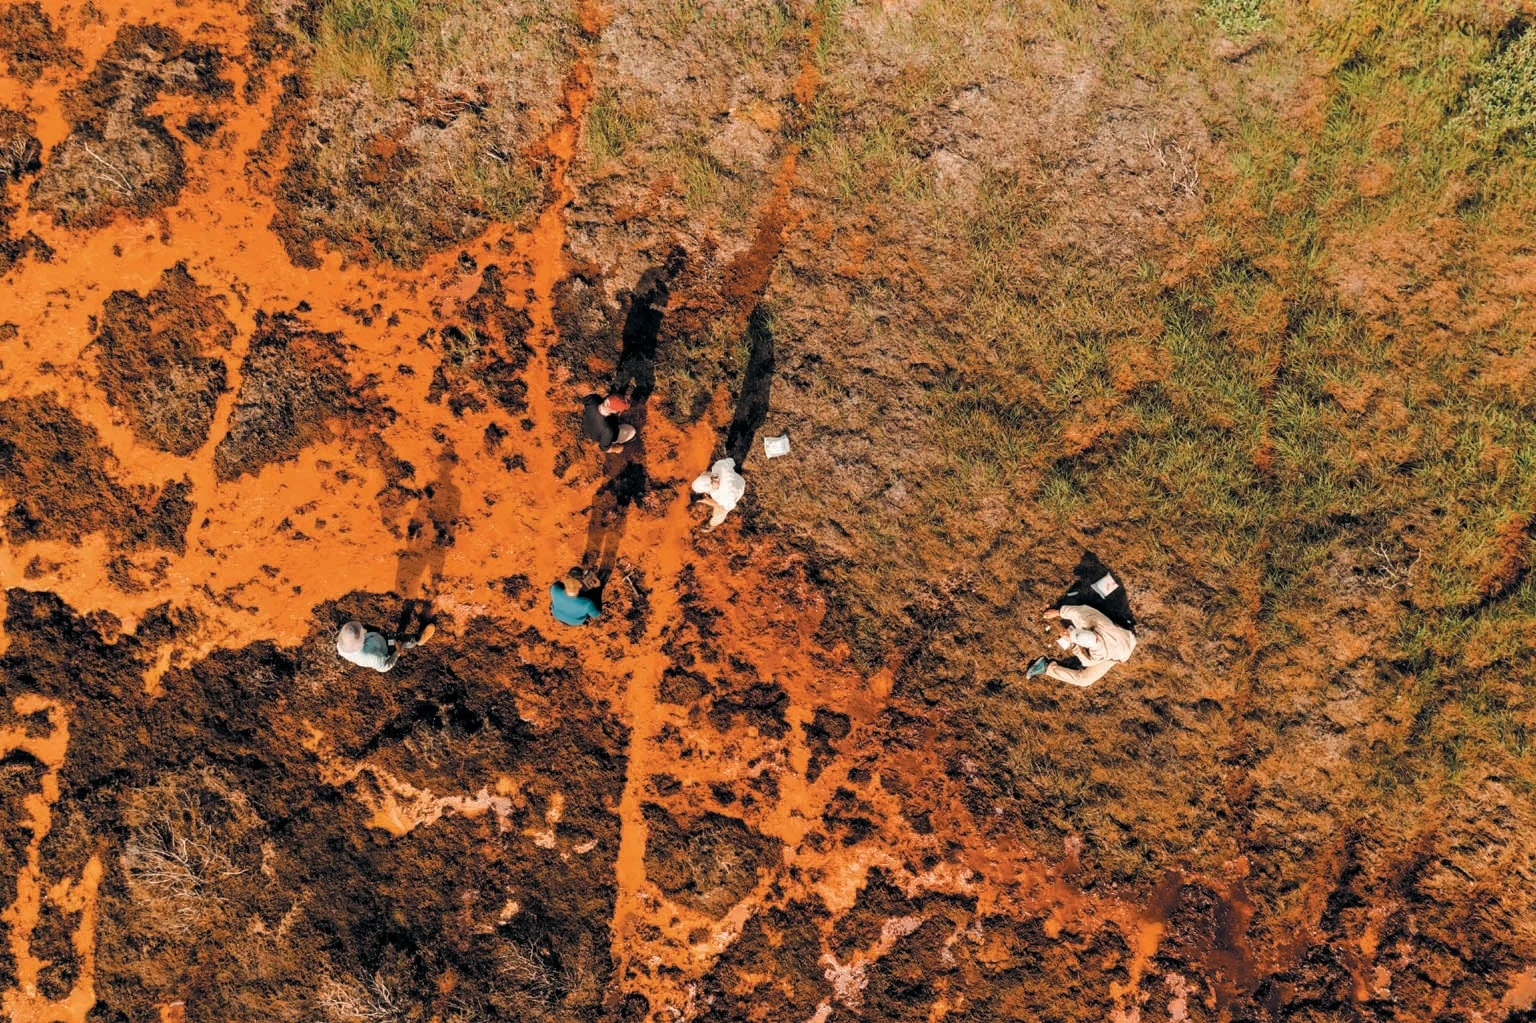 Researchers collect water samples and data at a rusty seep in northwestern Alaska’s Brooks Range. They think the straight orange lines may be trails left by caribou, Dall Sheep or wolves. Photo: Taylor Roades / Scientific American